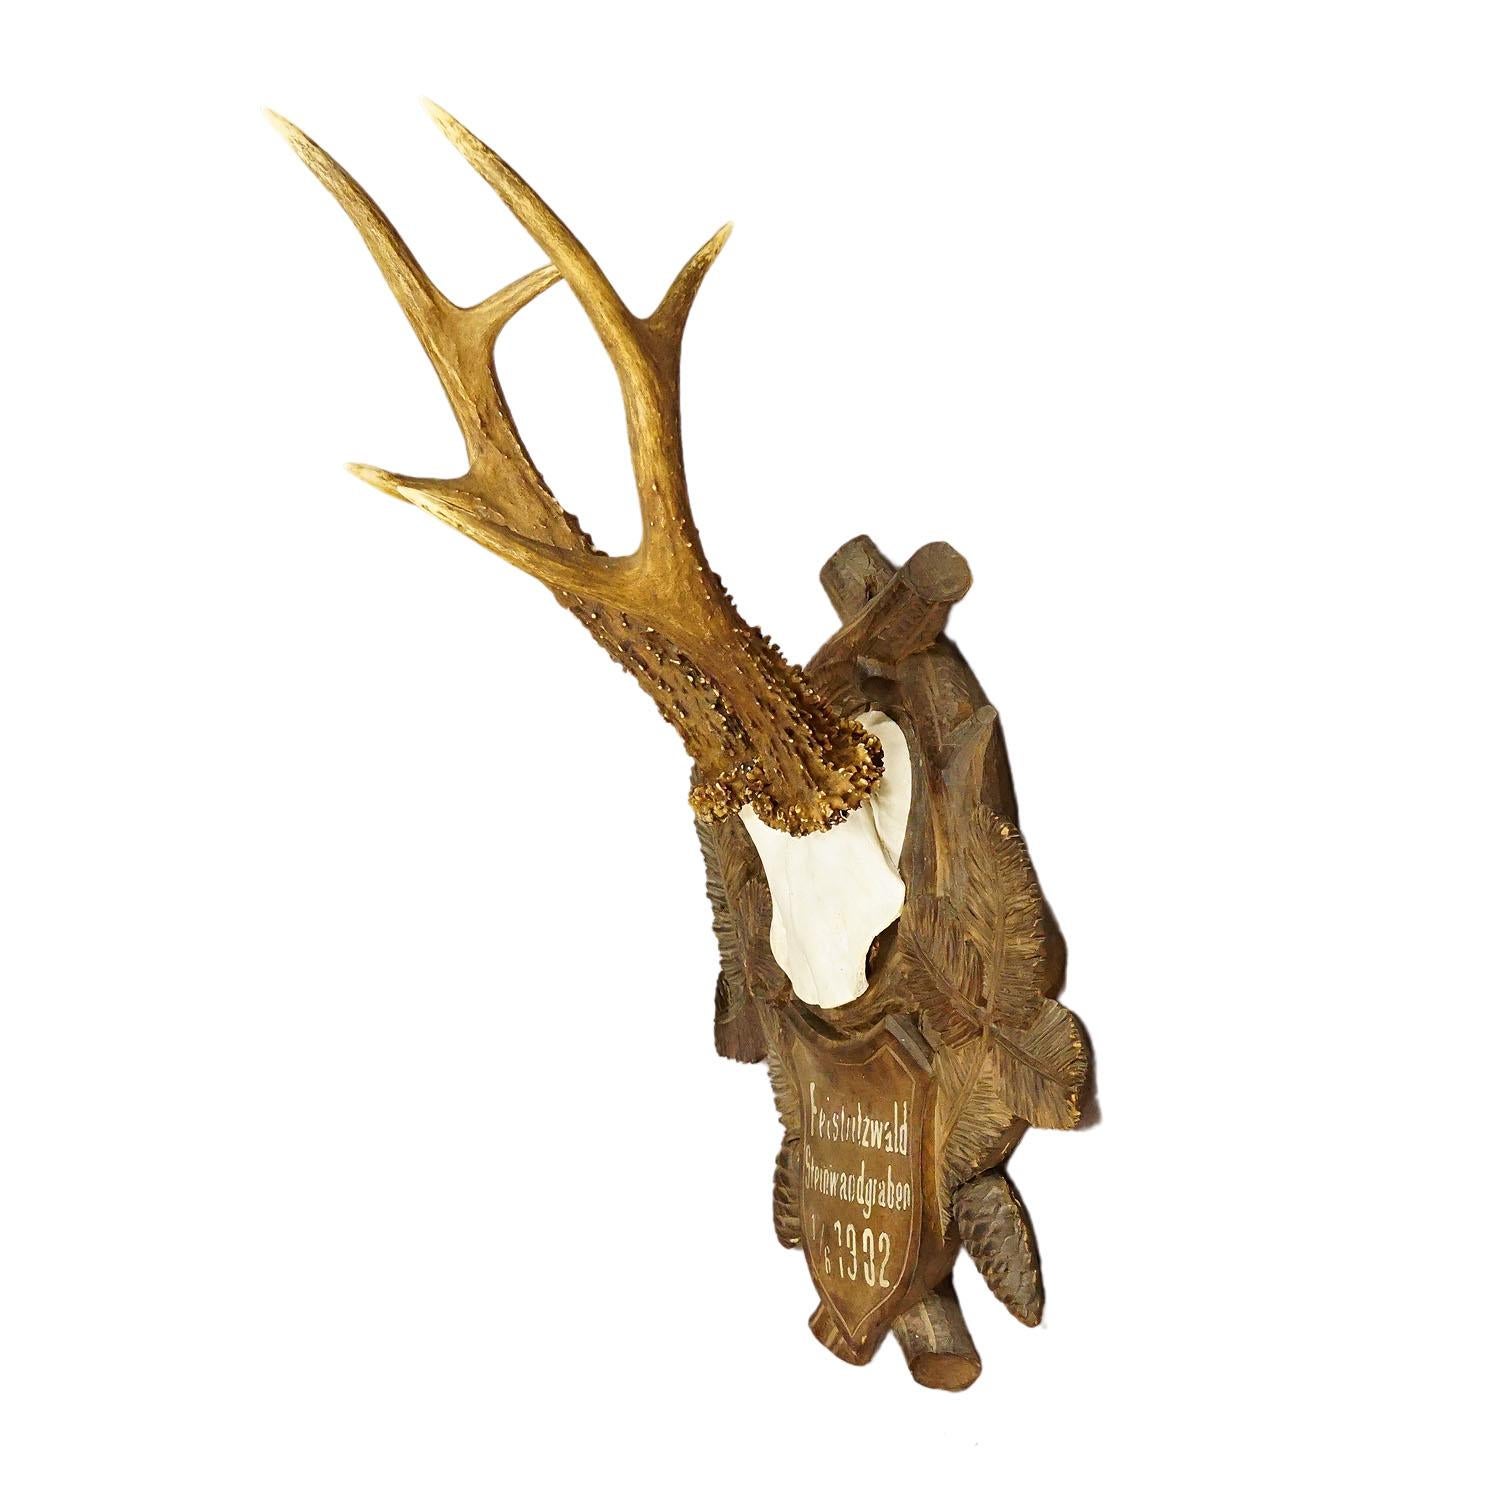 Great Deer Trophy Mount on Wooden Carved Plaque 1902

A large antique deer (Capreolus capreolus) trophy on a wooden carved plaque with light brown finish. The trophy was shot in 1902. Good condition with handpainted inscription on the